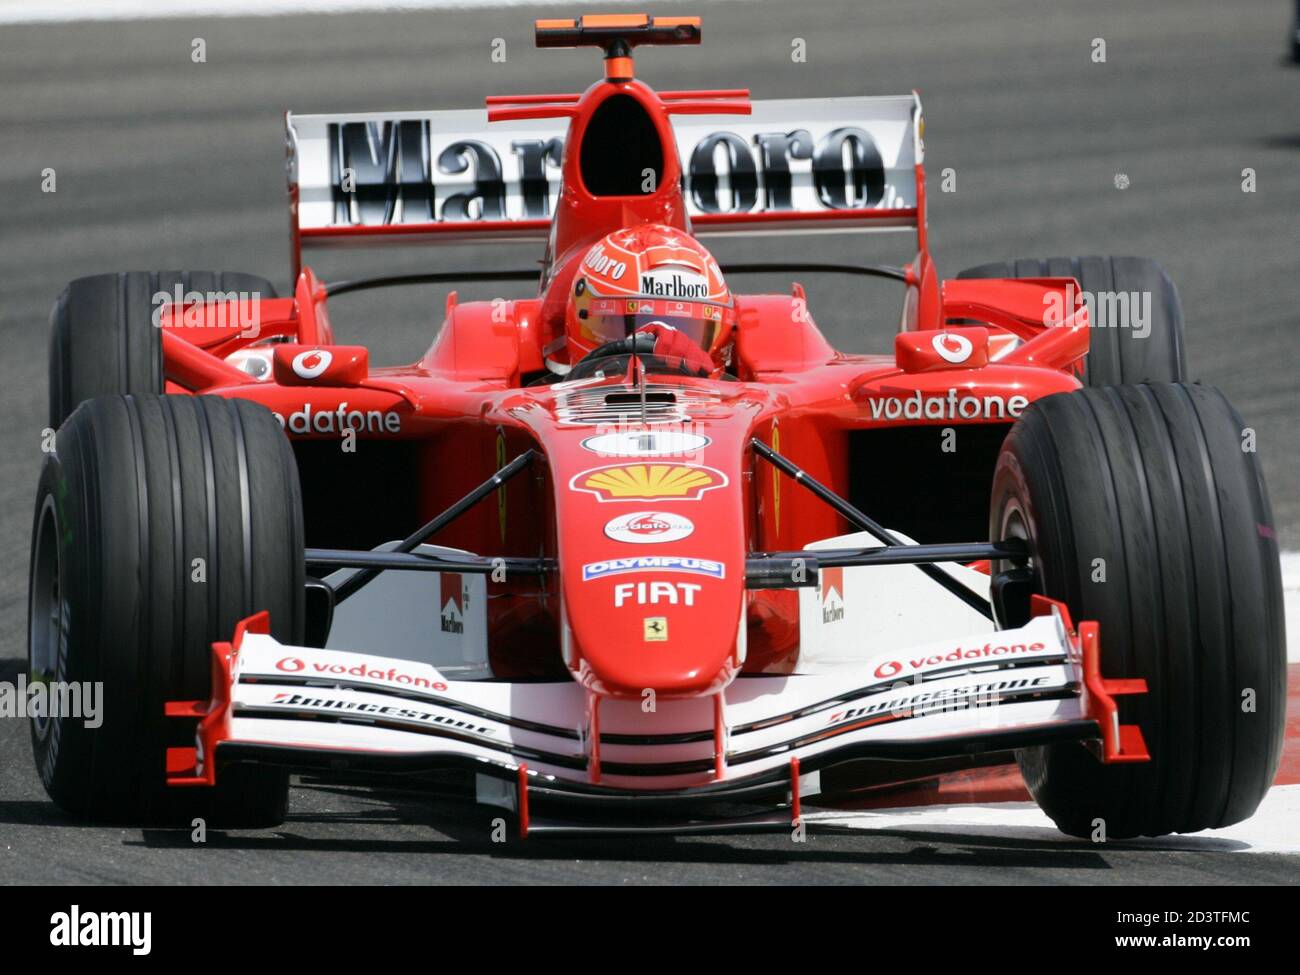 Ferrari Formula One world champion Michael Schumacher of Germany takes a  corner in the new F2005 model during the first practice session before the  Bahrain Formula One Grand Prix in Bahrain April